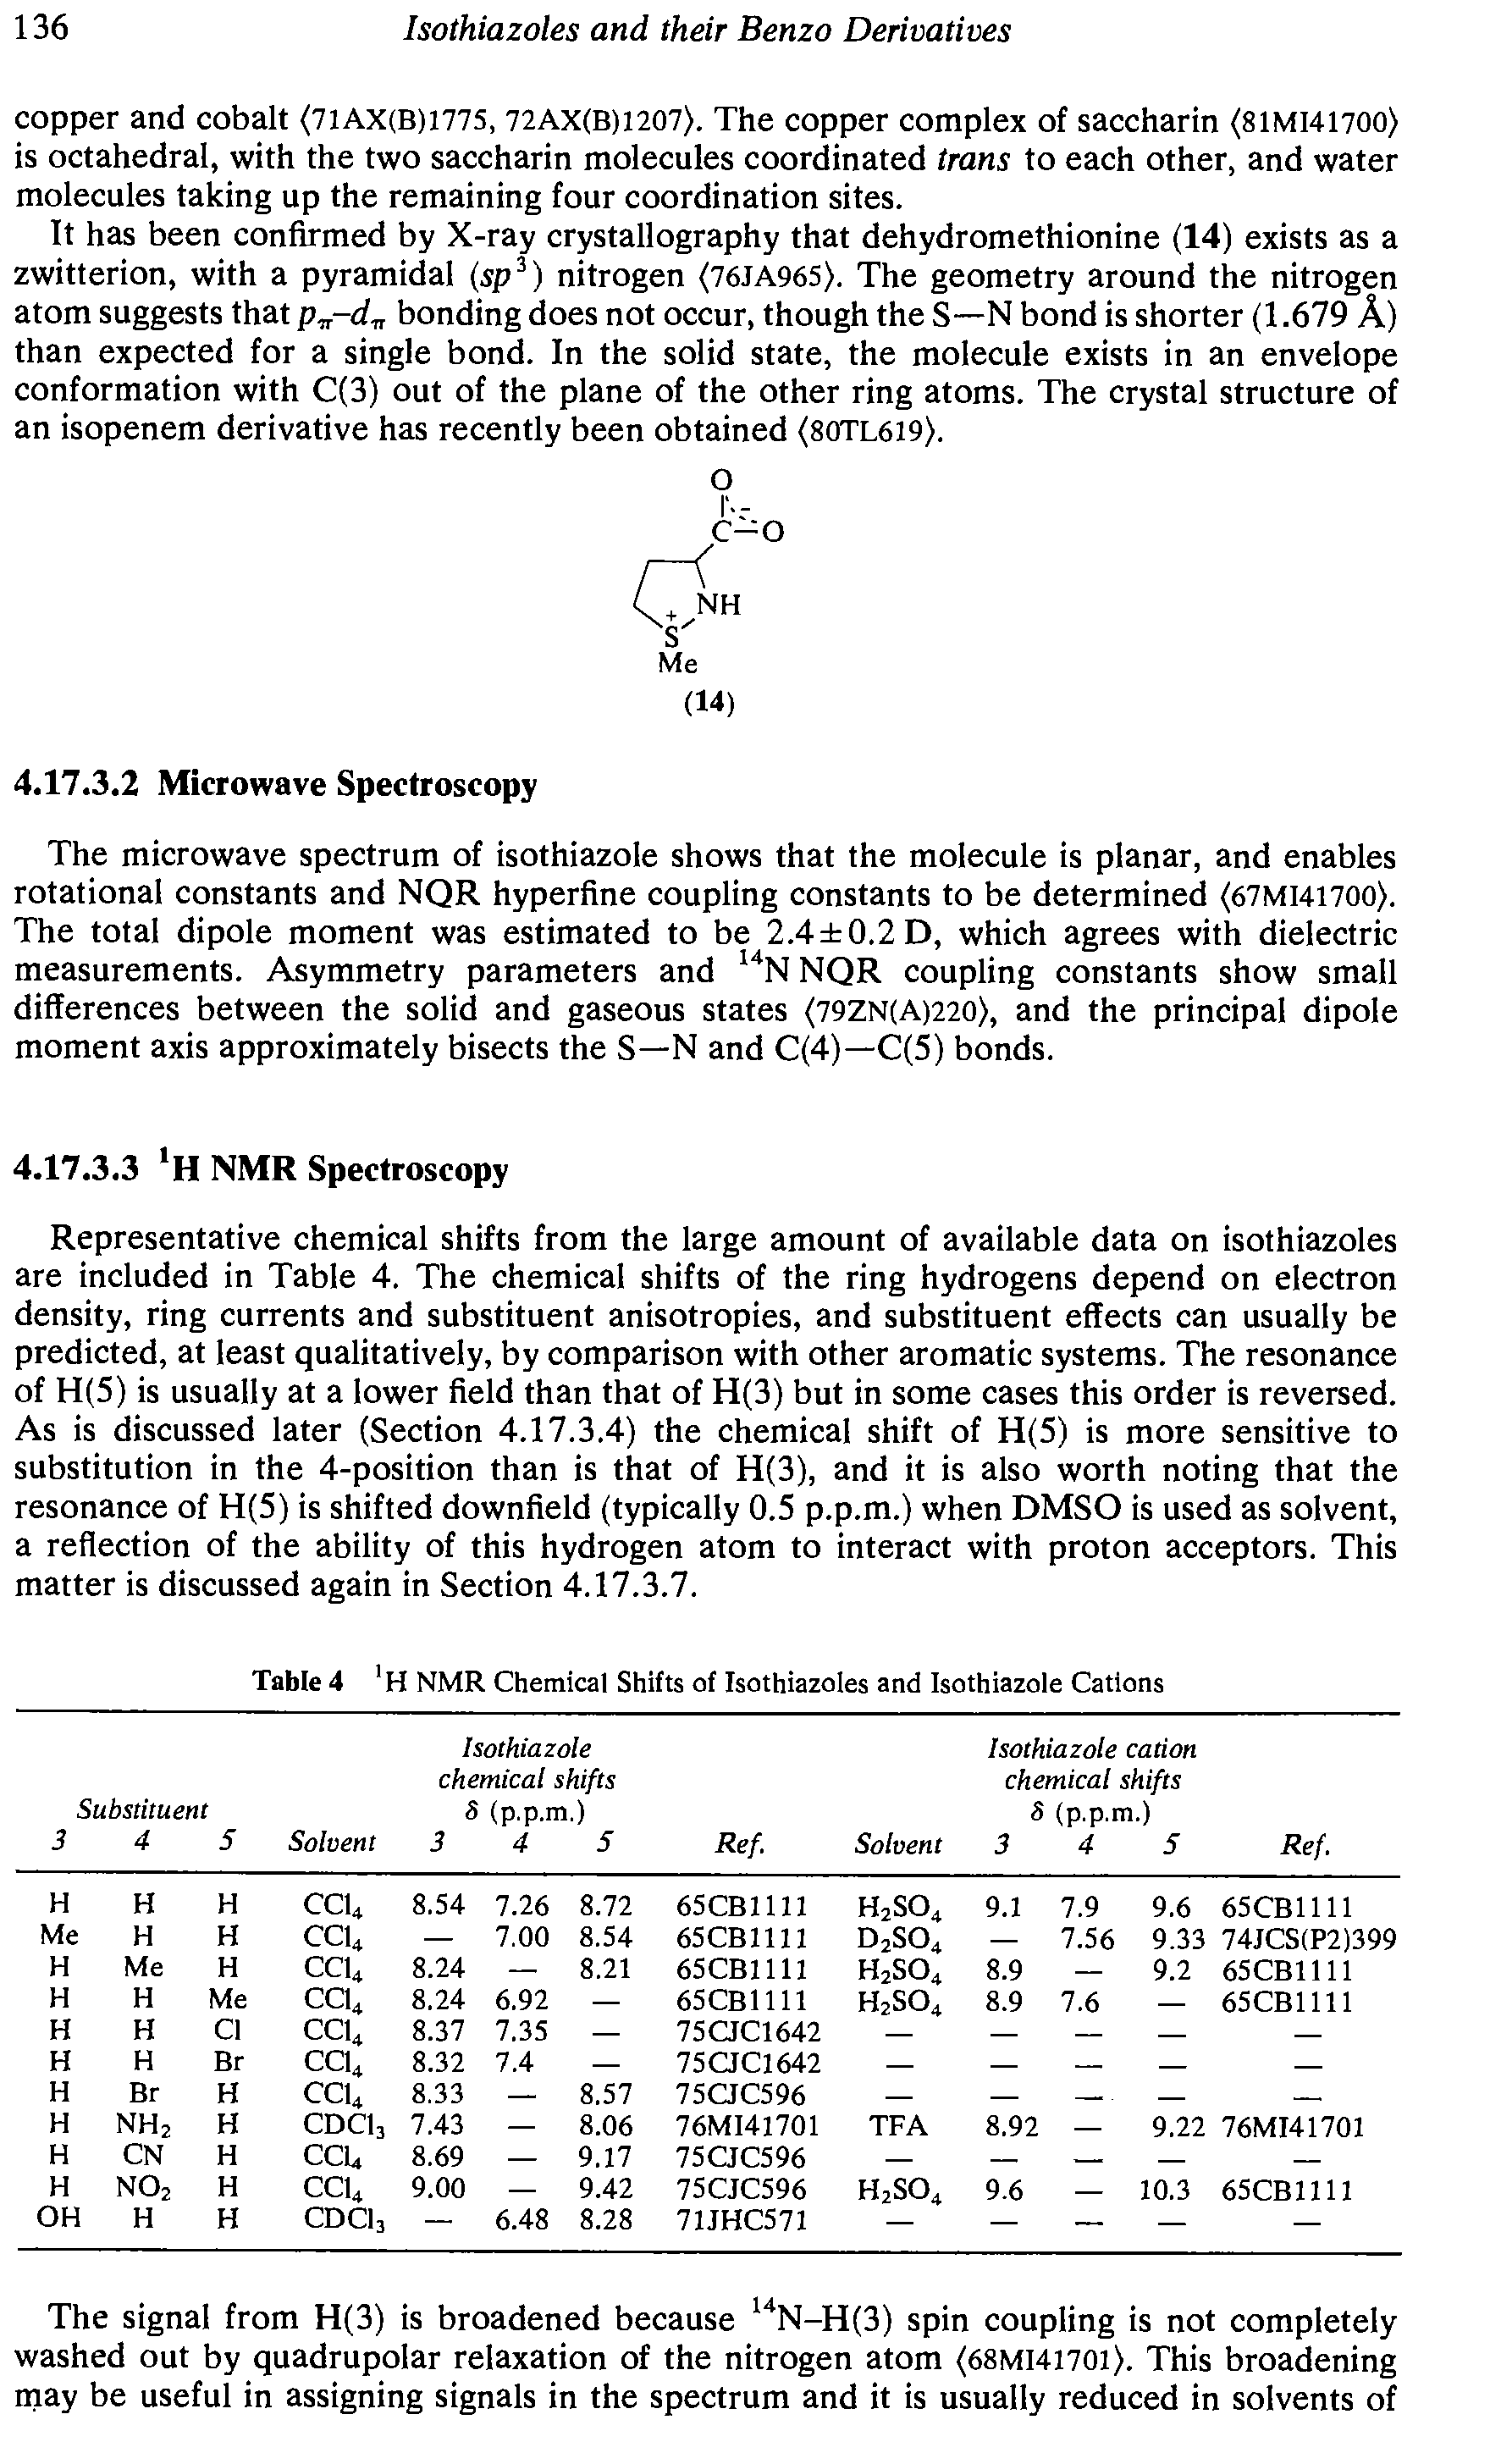 Table 4 H NMR Chemical Shifts of Isothiazoies and Isothiazole Cations...